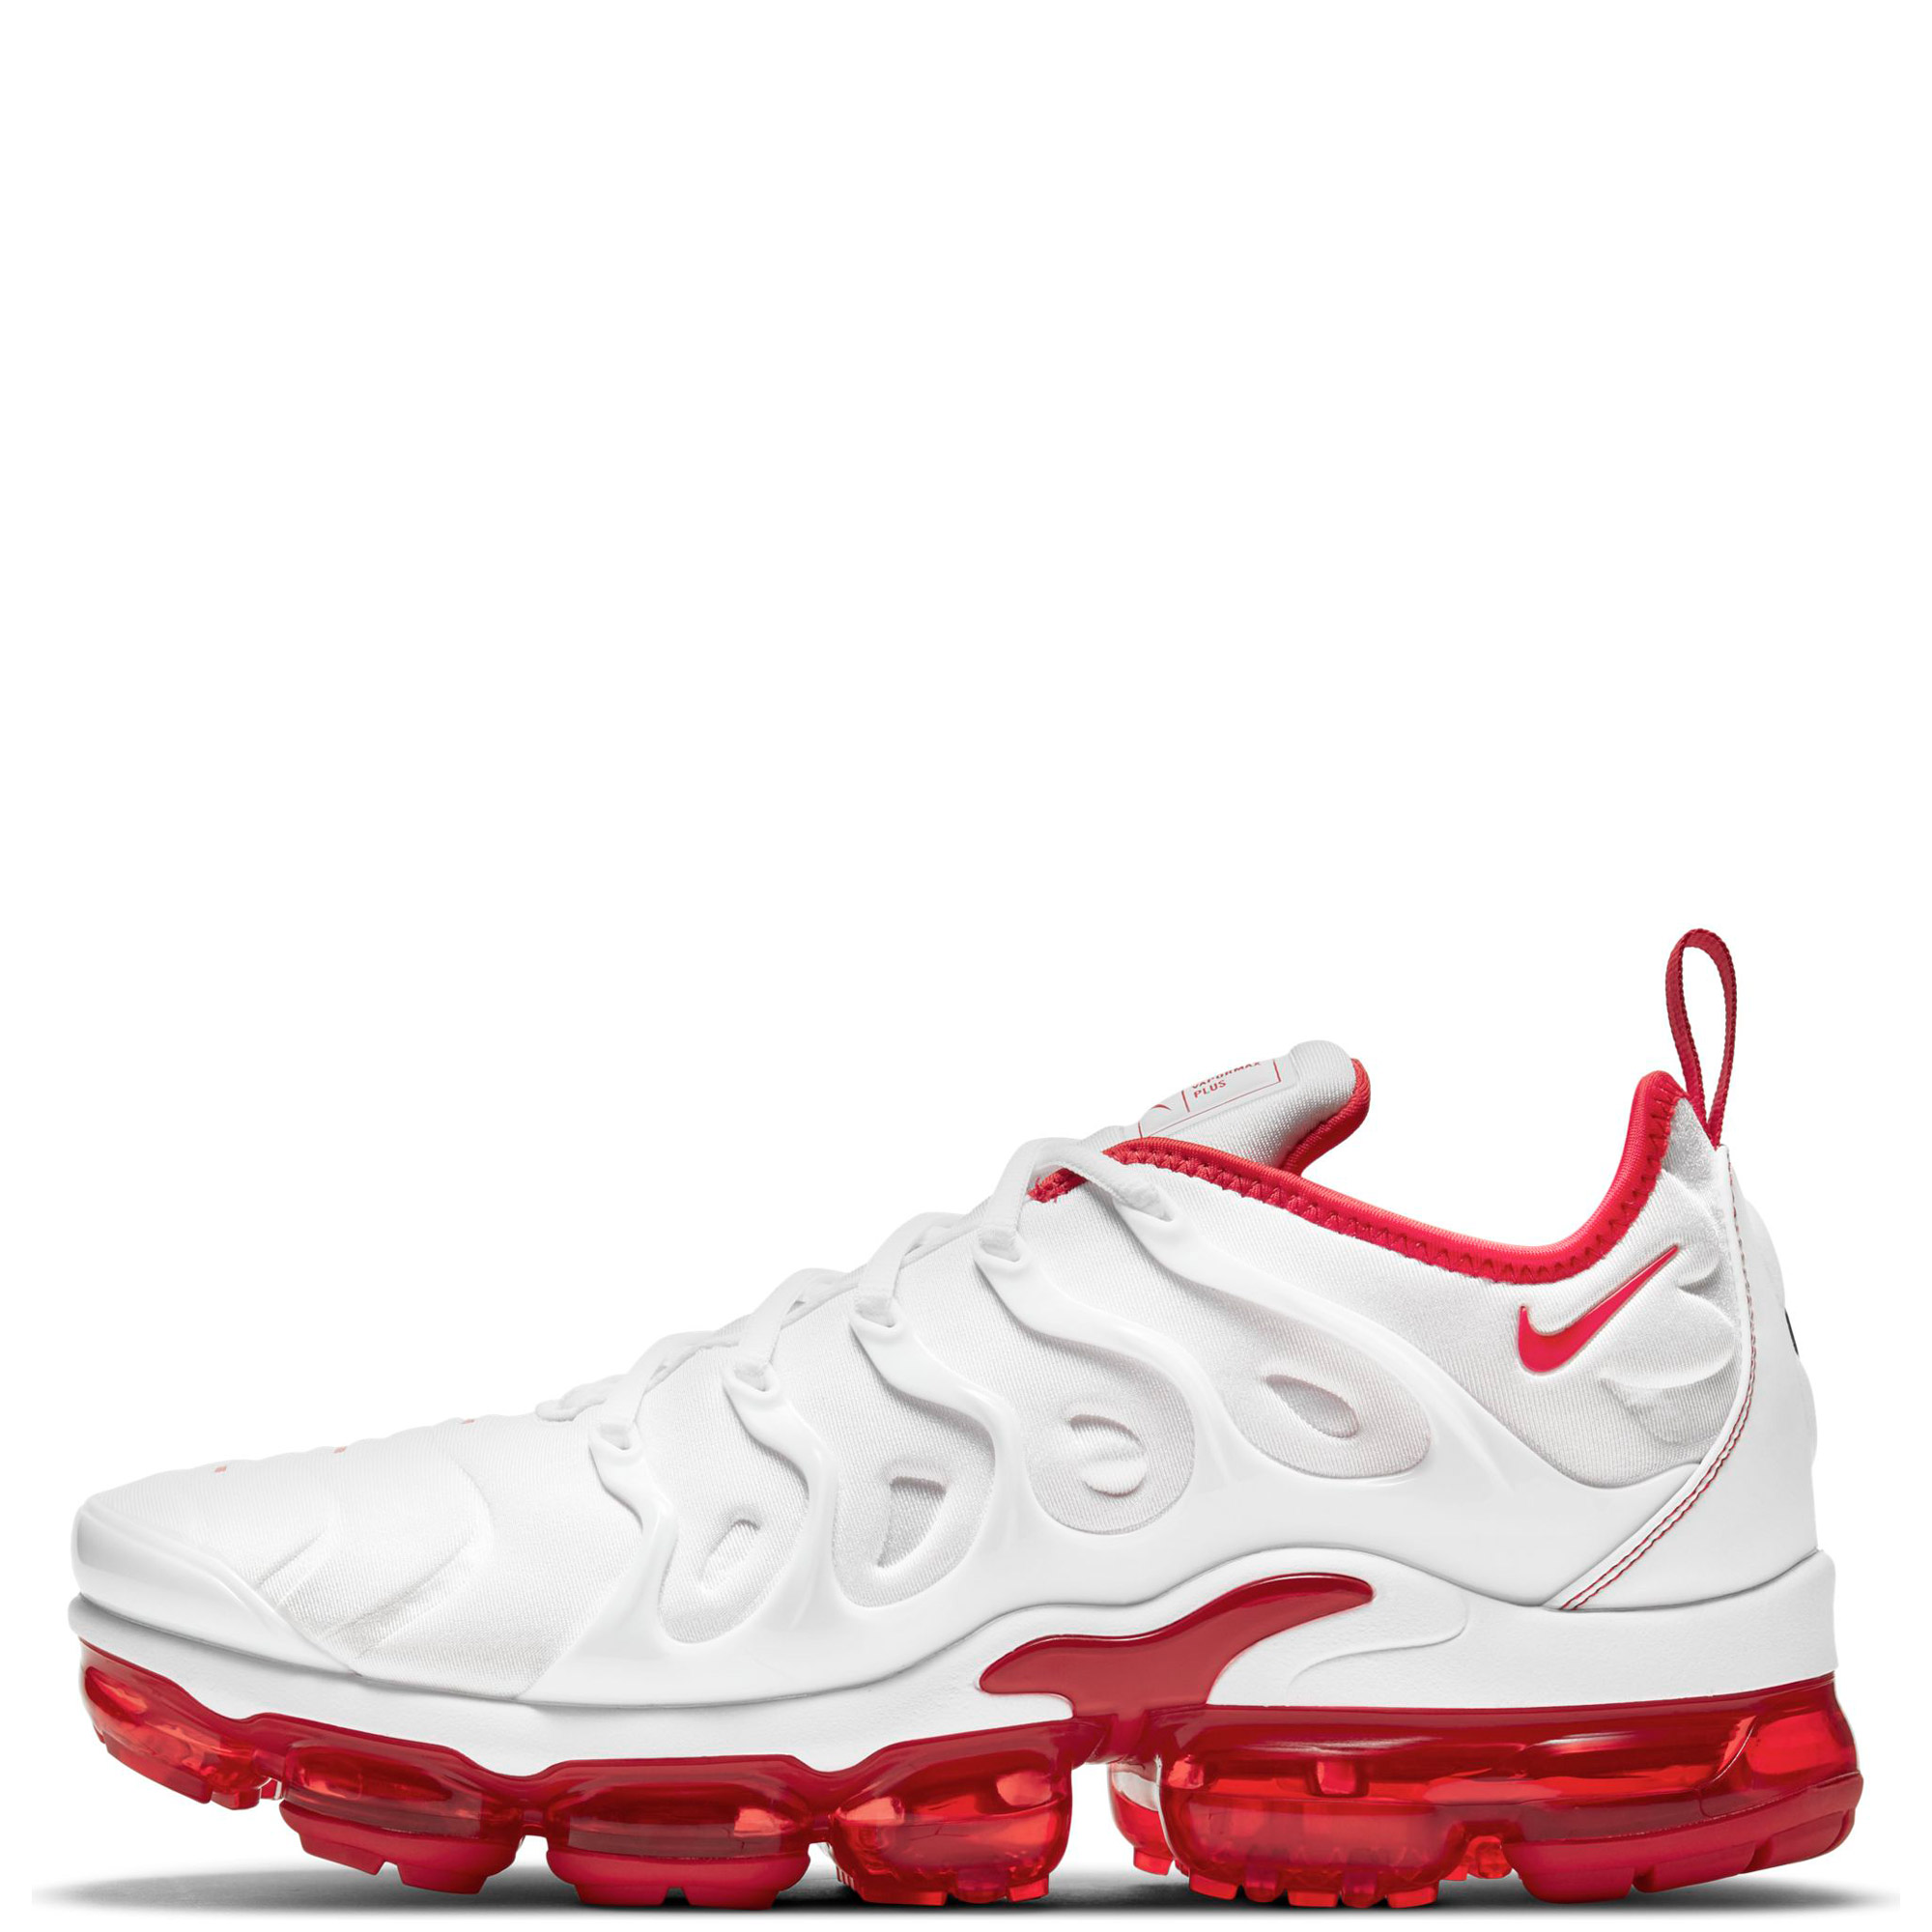 white with red bottom vapormax